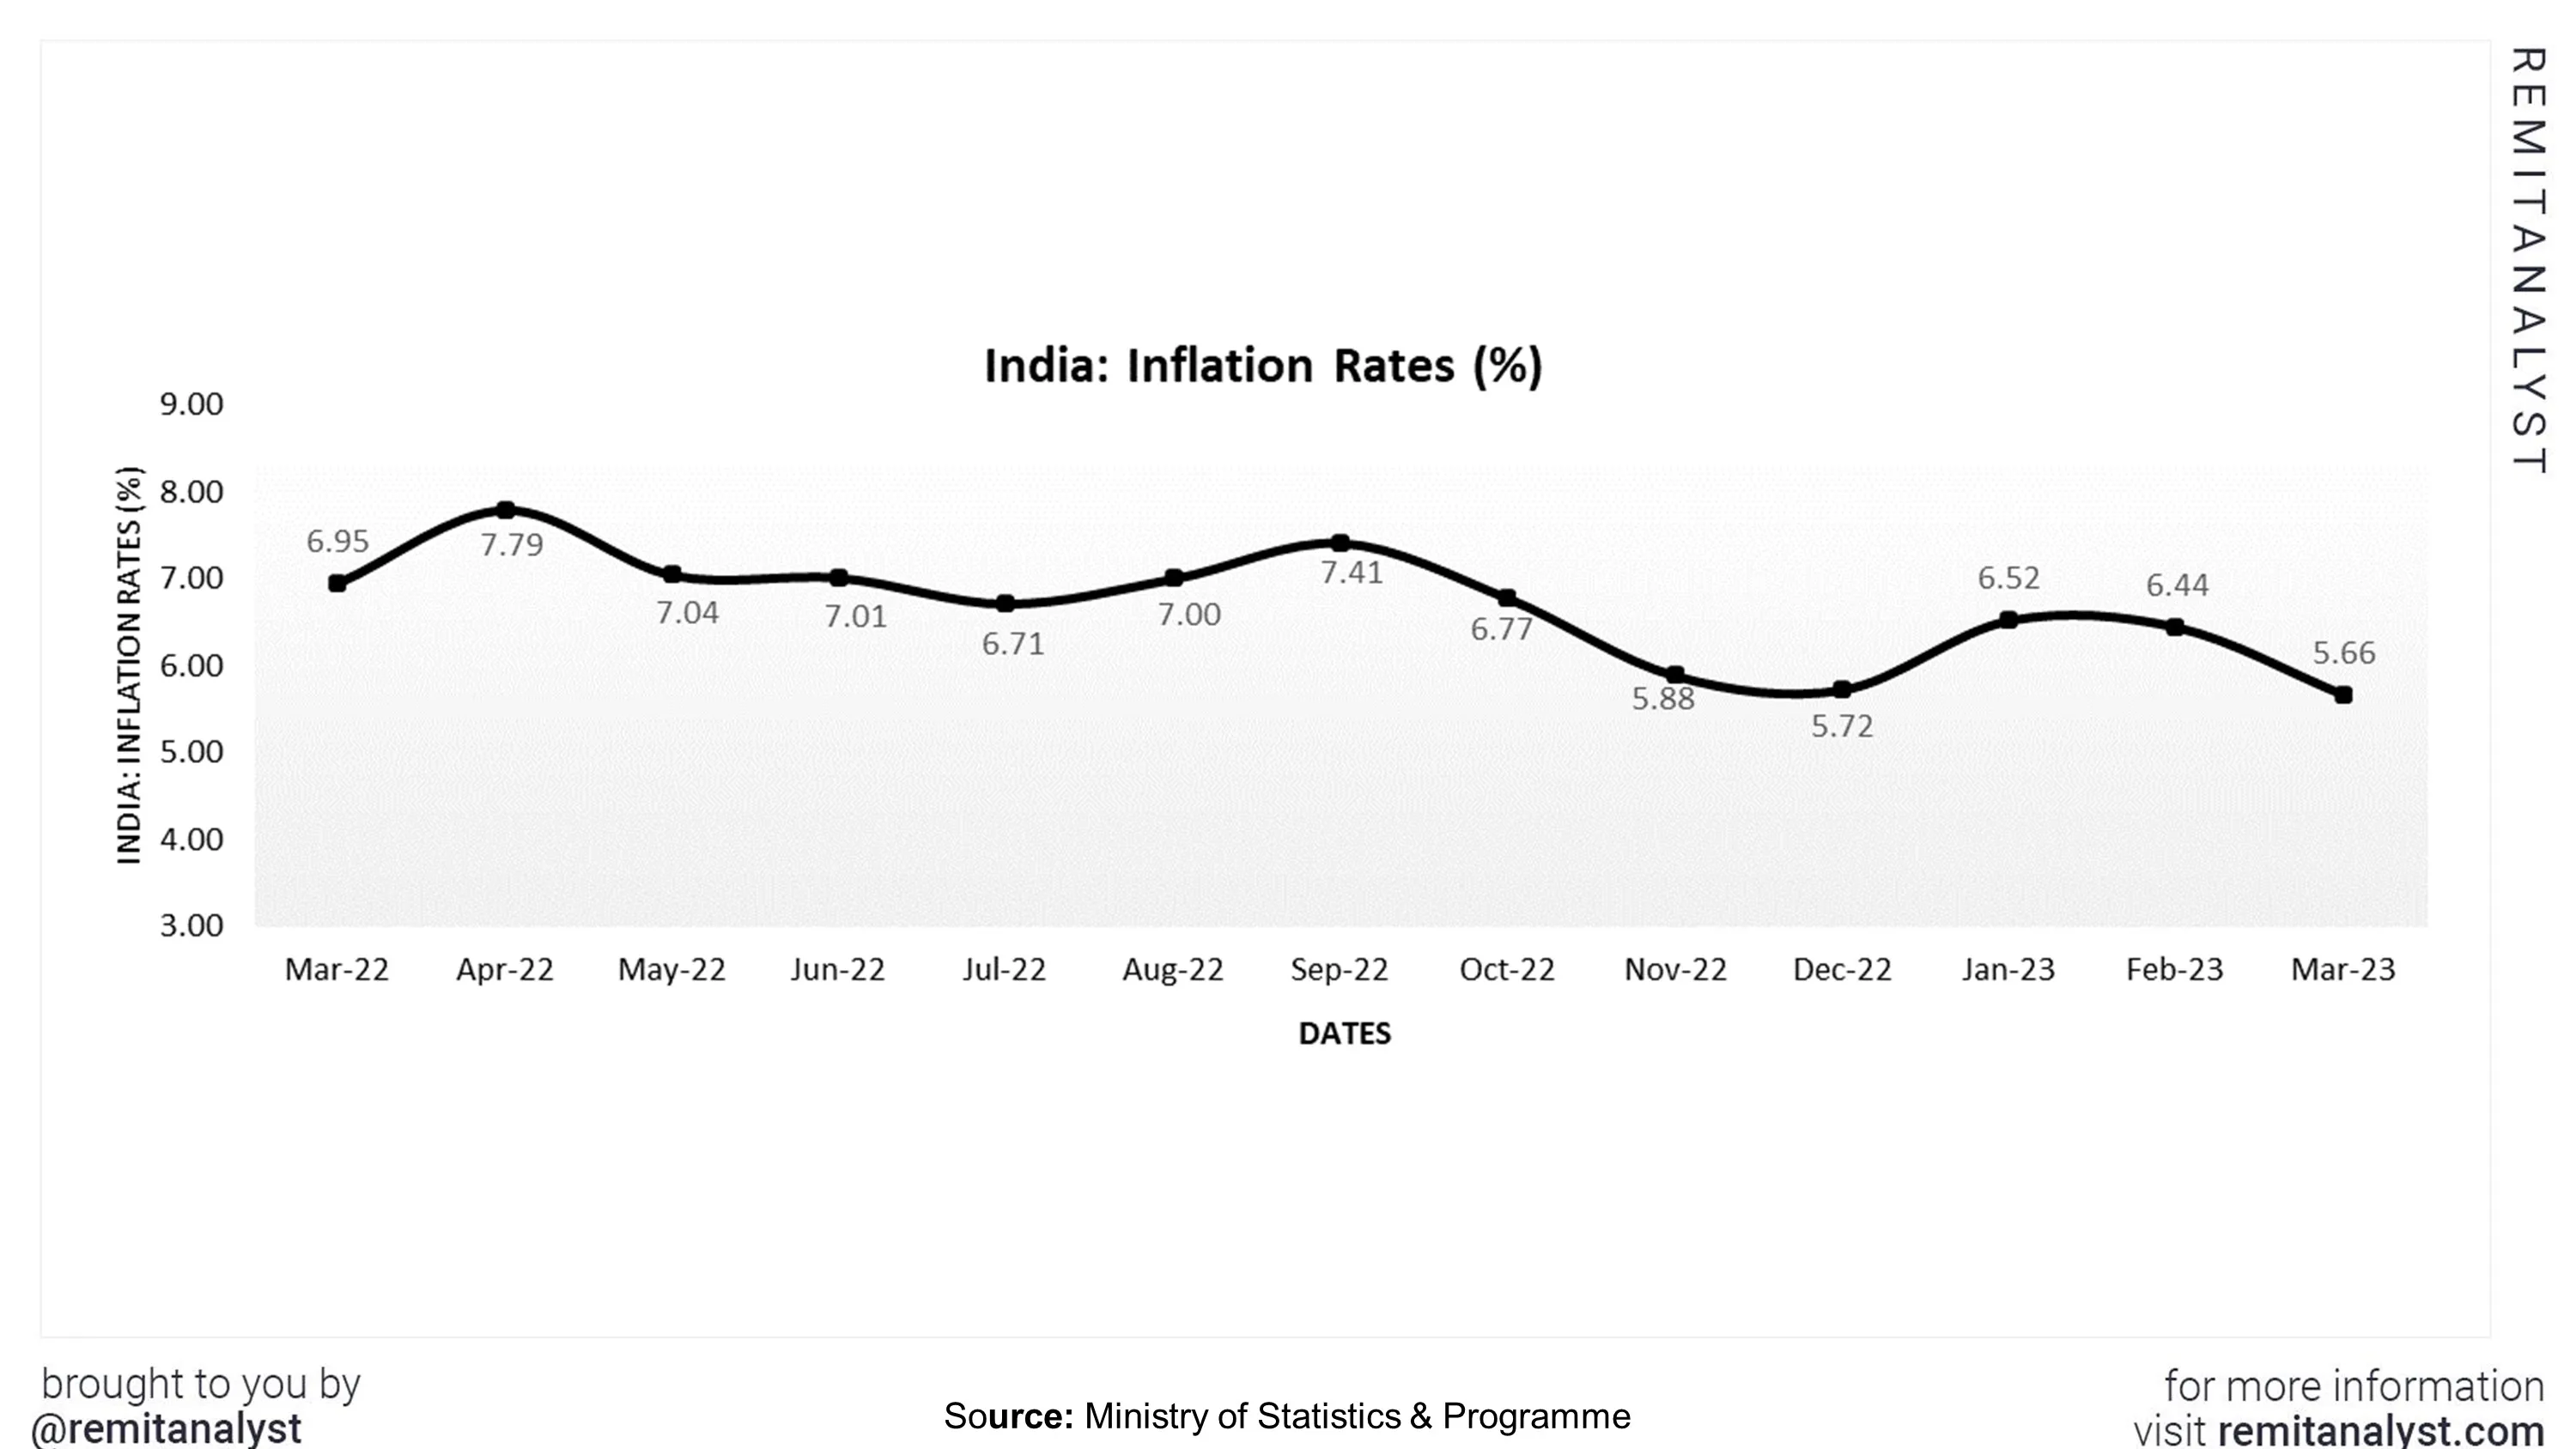 inflation-rates-india-from-mar-2022-to-mar-2023